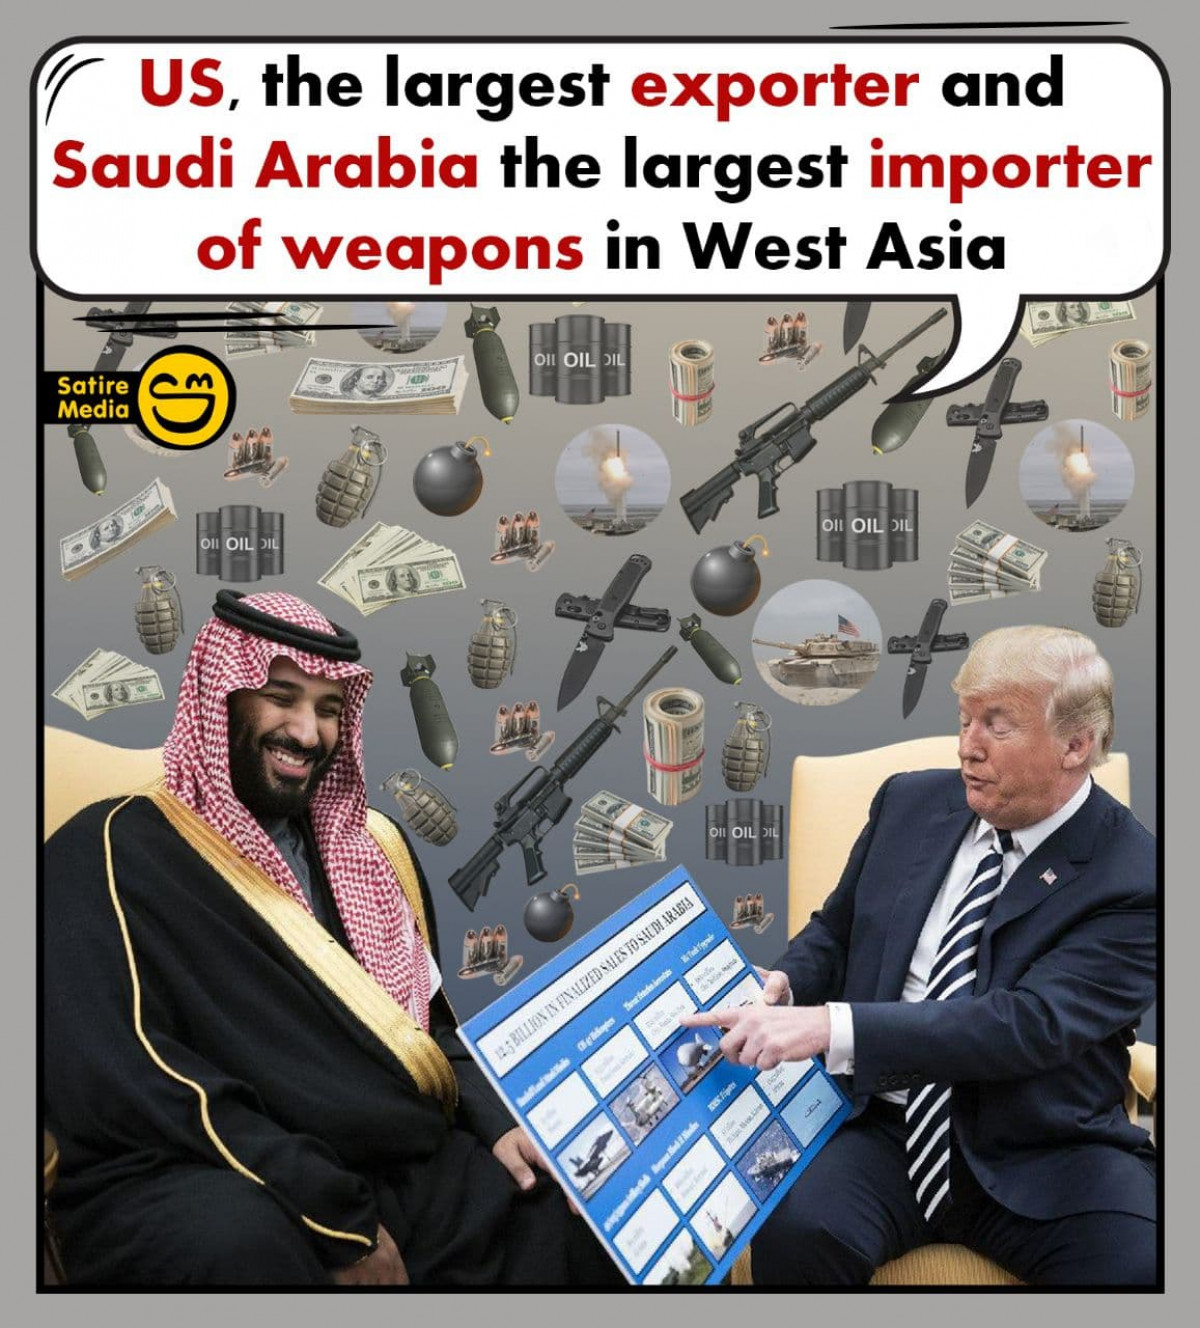 US, the largest exporter and Saudi Arabia the largest importer of weapons in West Asia